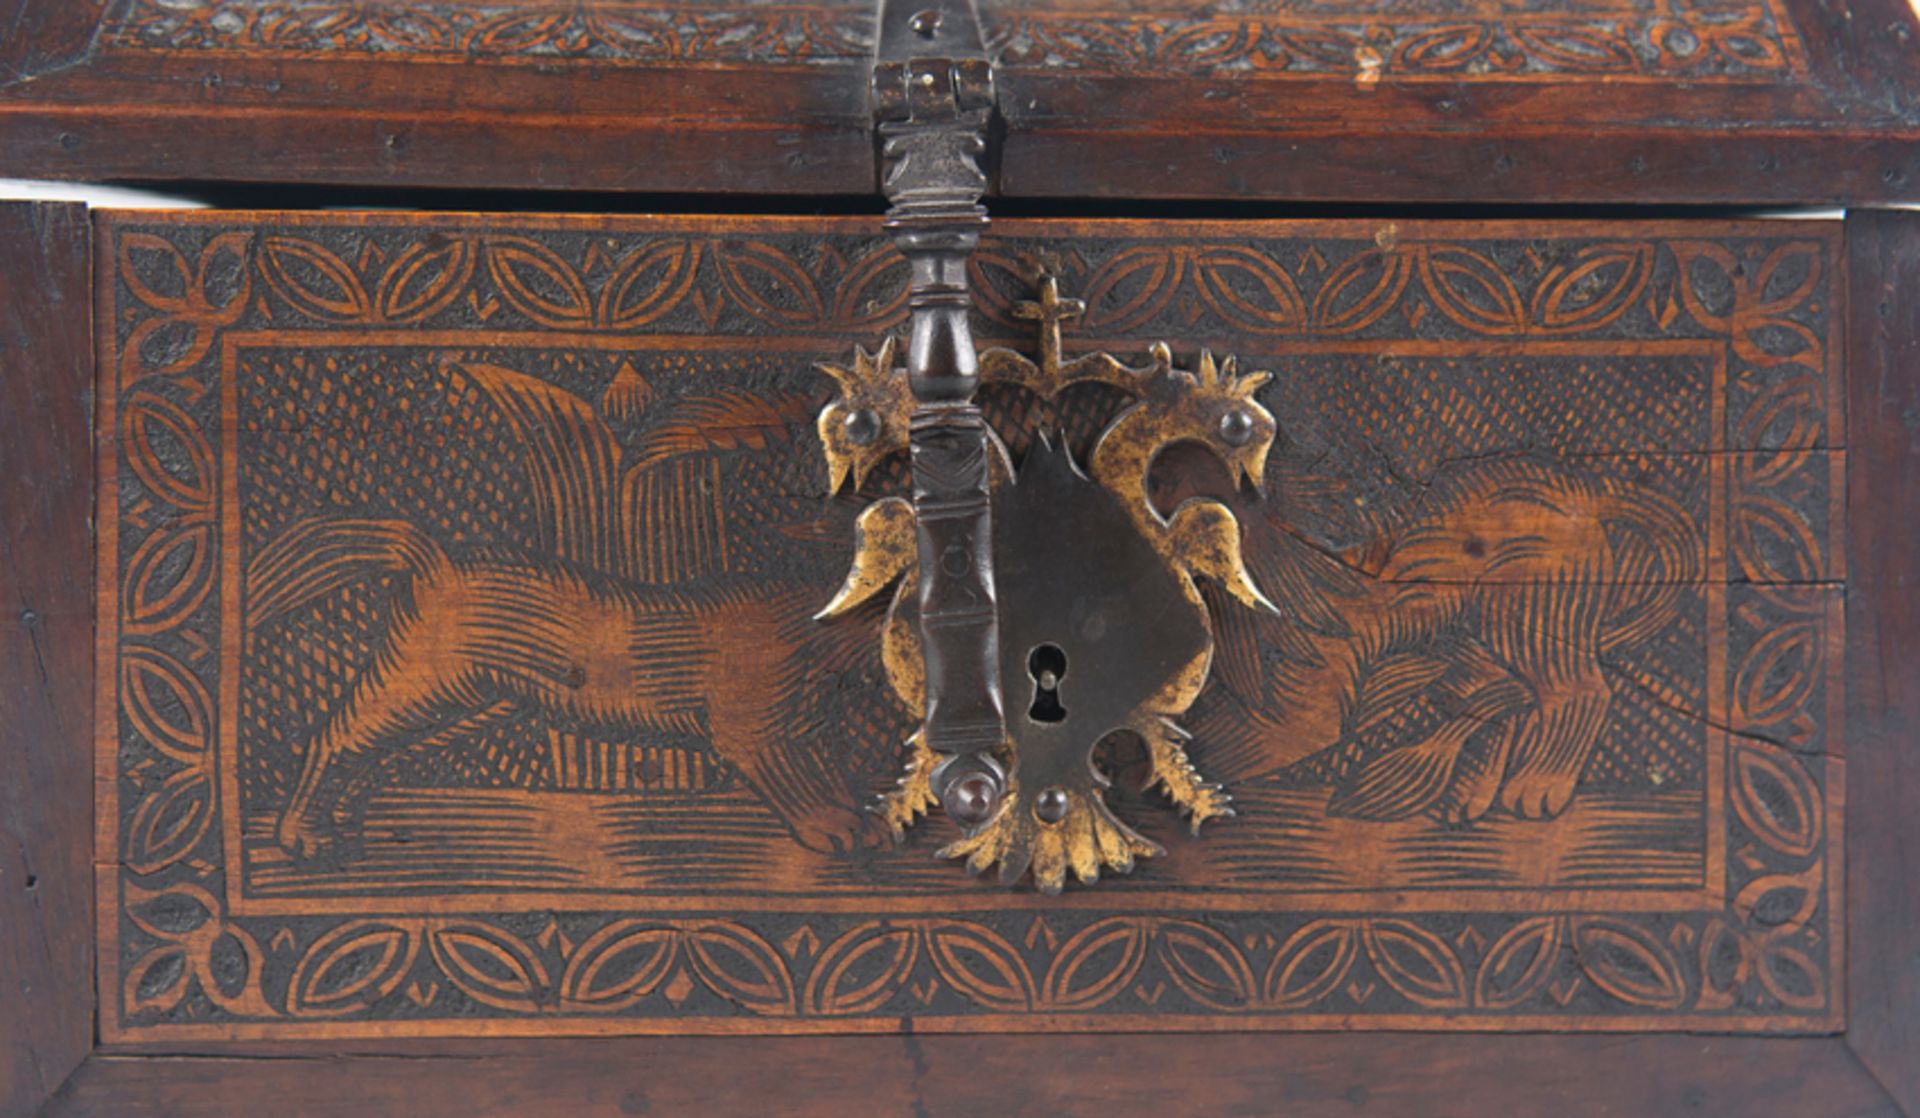 Engraved wooden chest with iron fittings and curved lid. Colonial work. Villa Alta de San Ildefonso, - Image 4 of 11